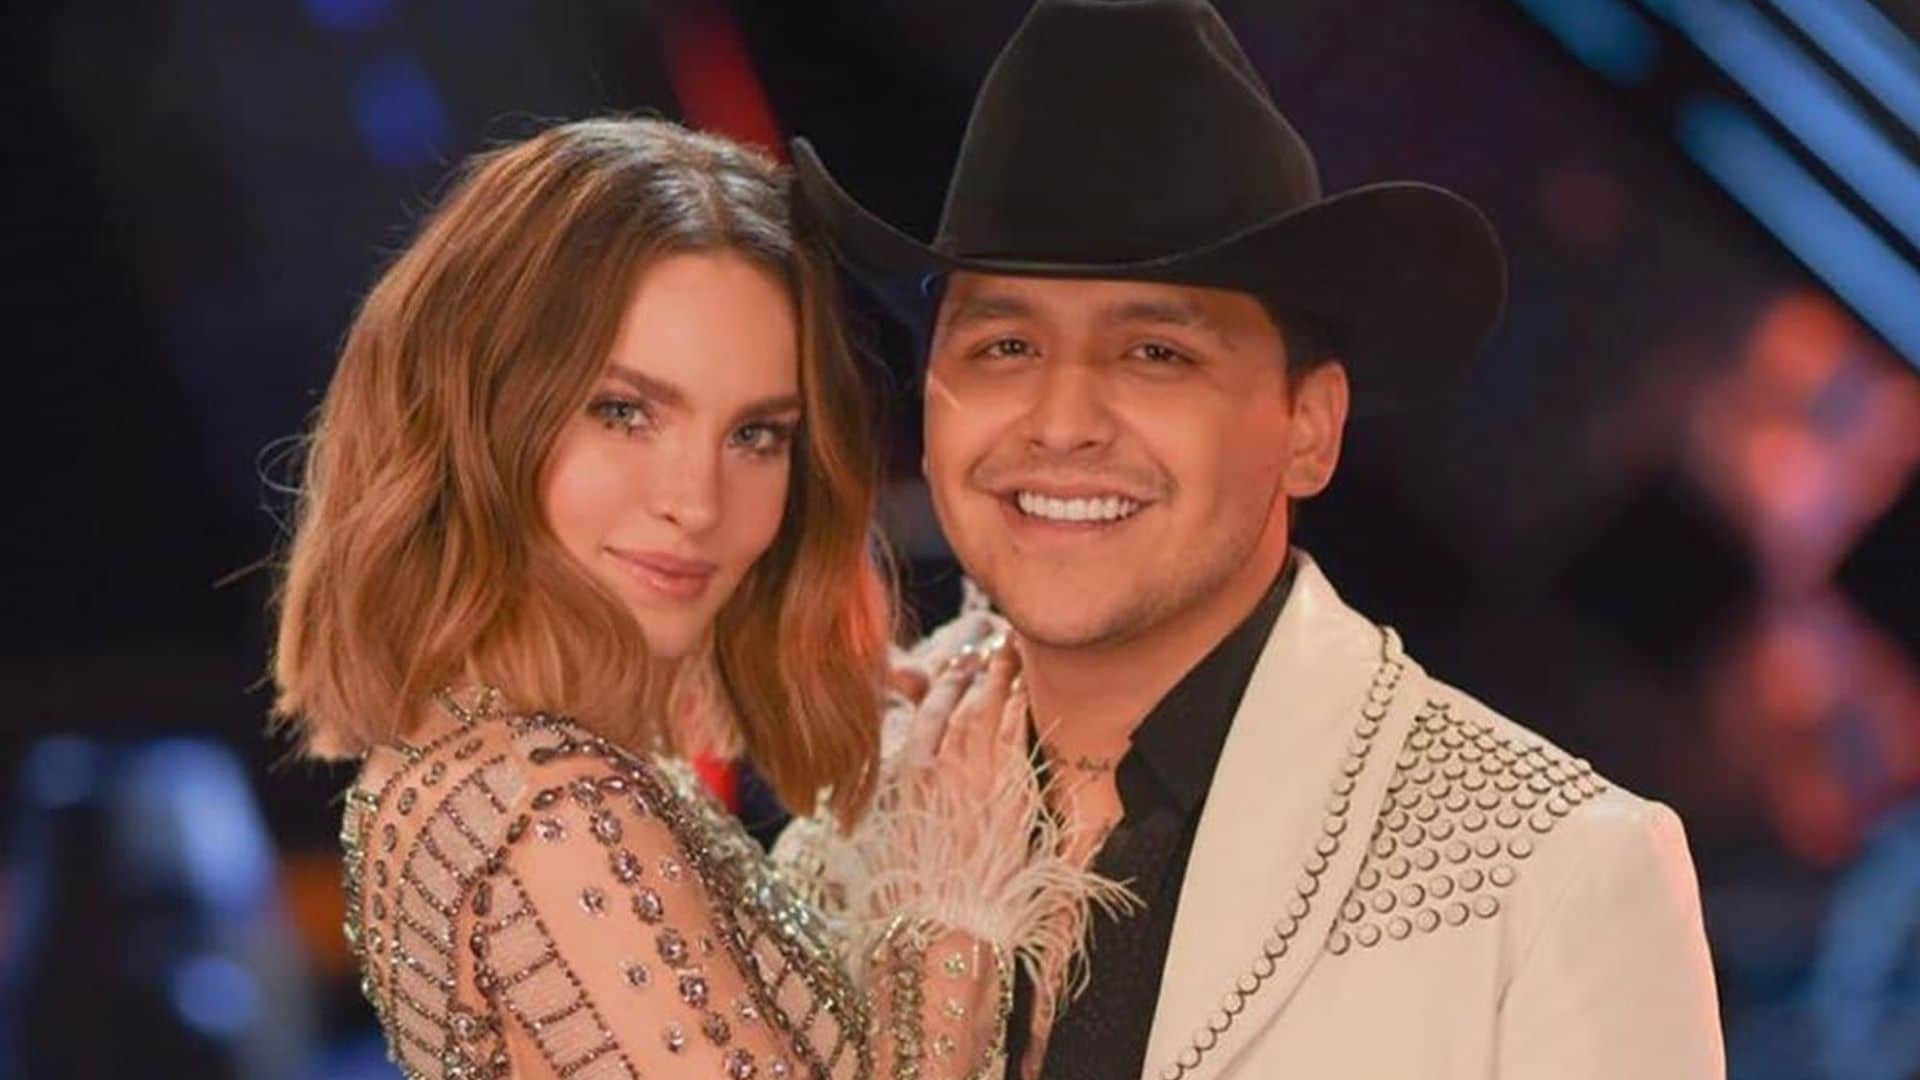 Belinda and Christian Nodal’s rendition of ‘Si Nos Dejan’ is a telenovela’s theme song and their first collaboration